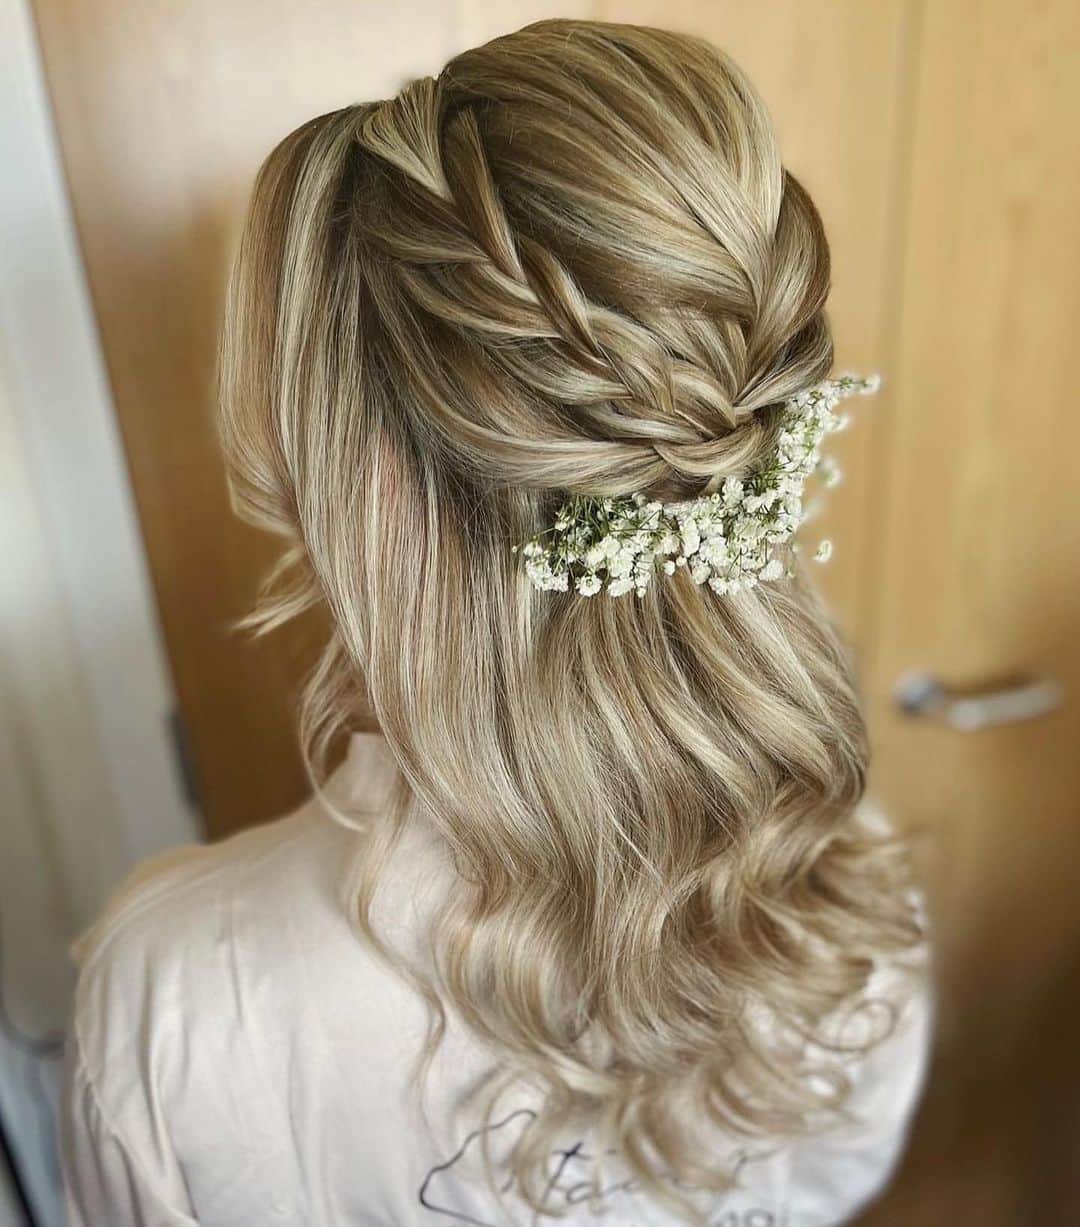 I N S T A B R A I Dのインスタグラム：「What hair look would you do for your wedding day? ☝🏼 or ✌🏼」